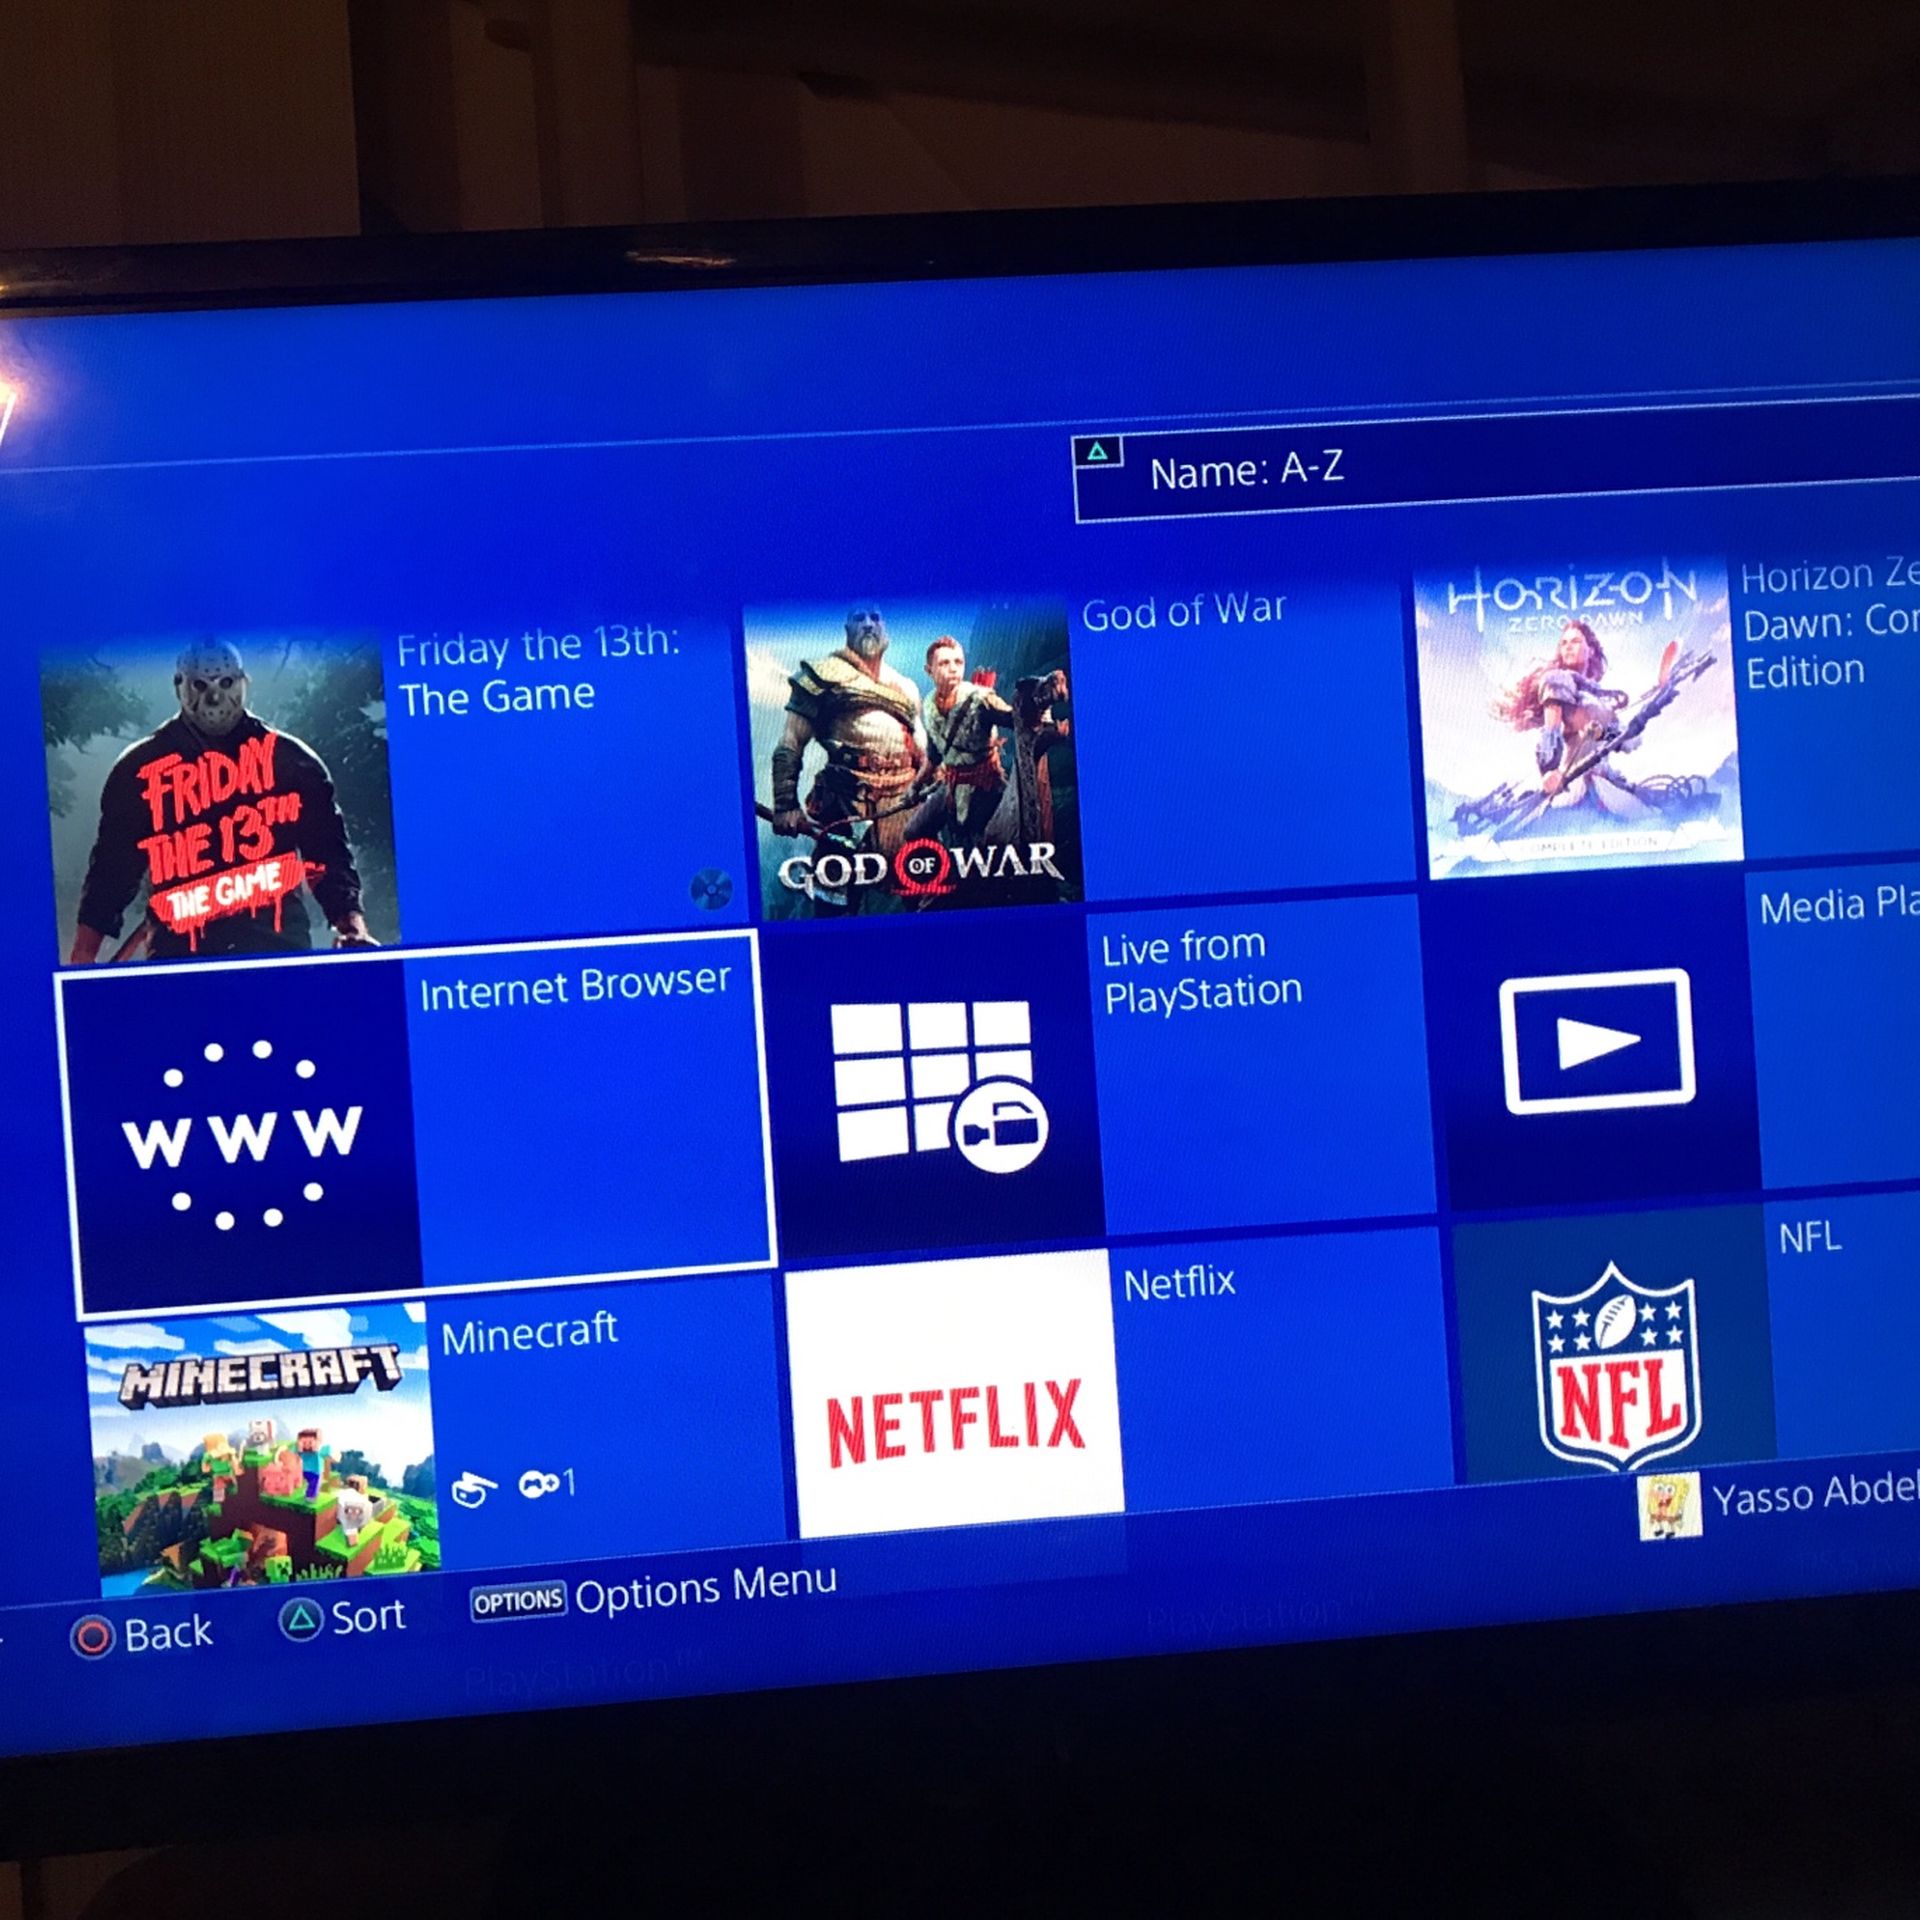 PS4 For Sale With Games Such As God Of War, Horizon Zero Dawn, And Minecraft